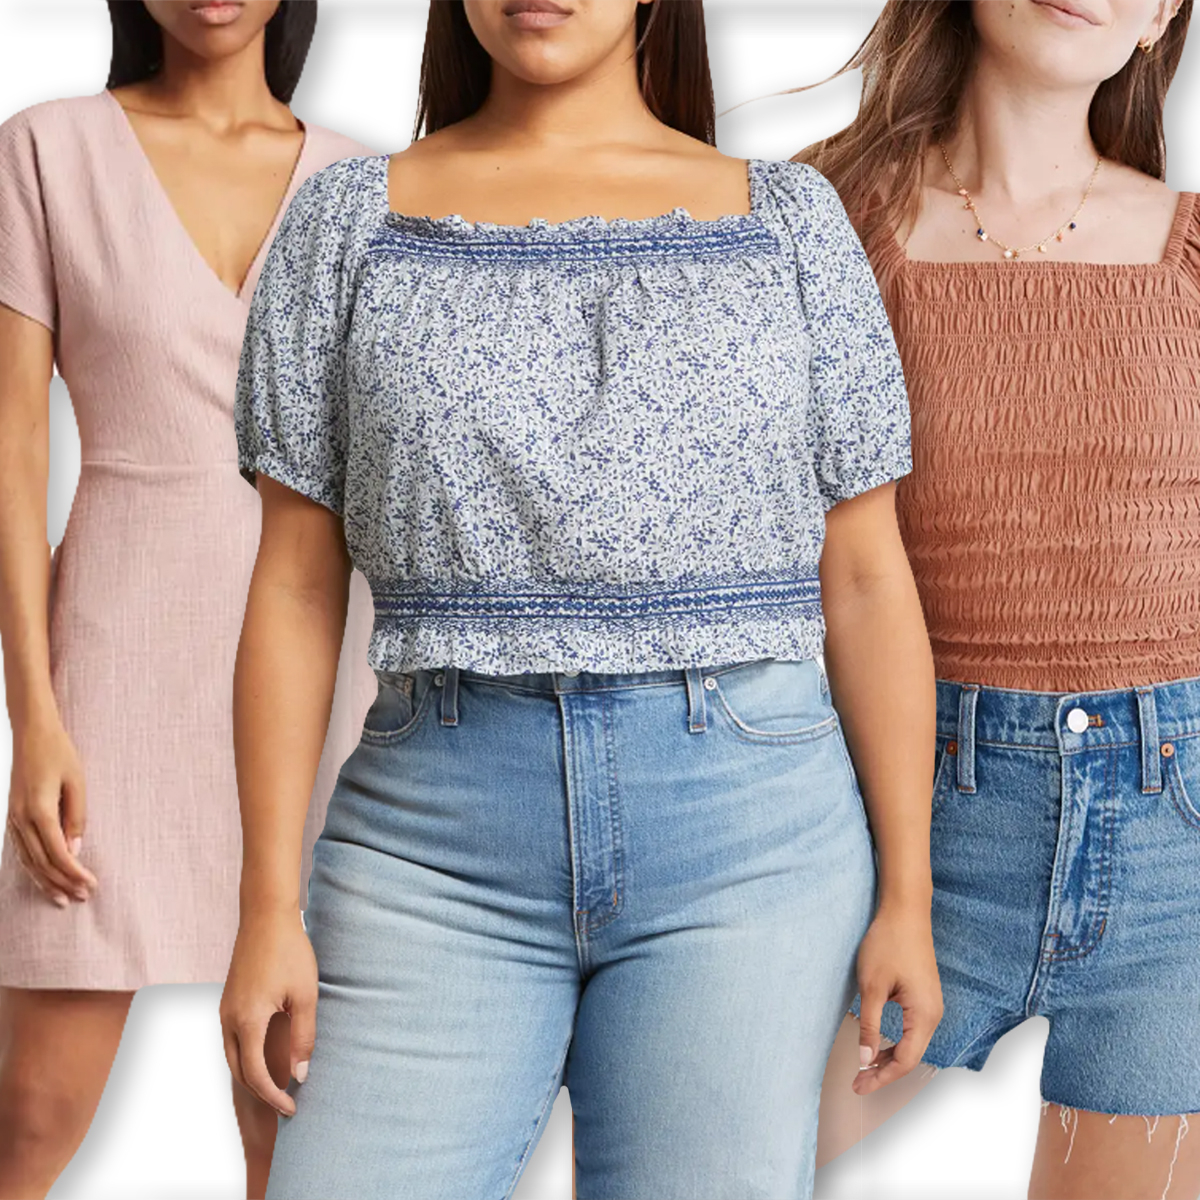 Nordstrom Rack Has Jaw-Dropping Madewell Deals Ending Today